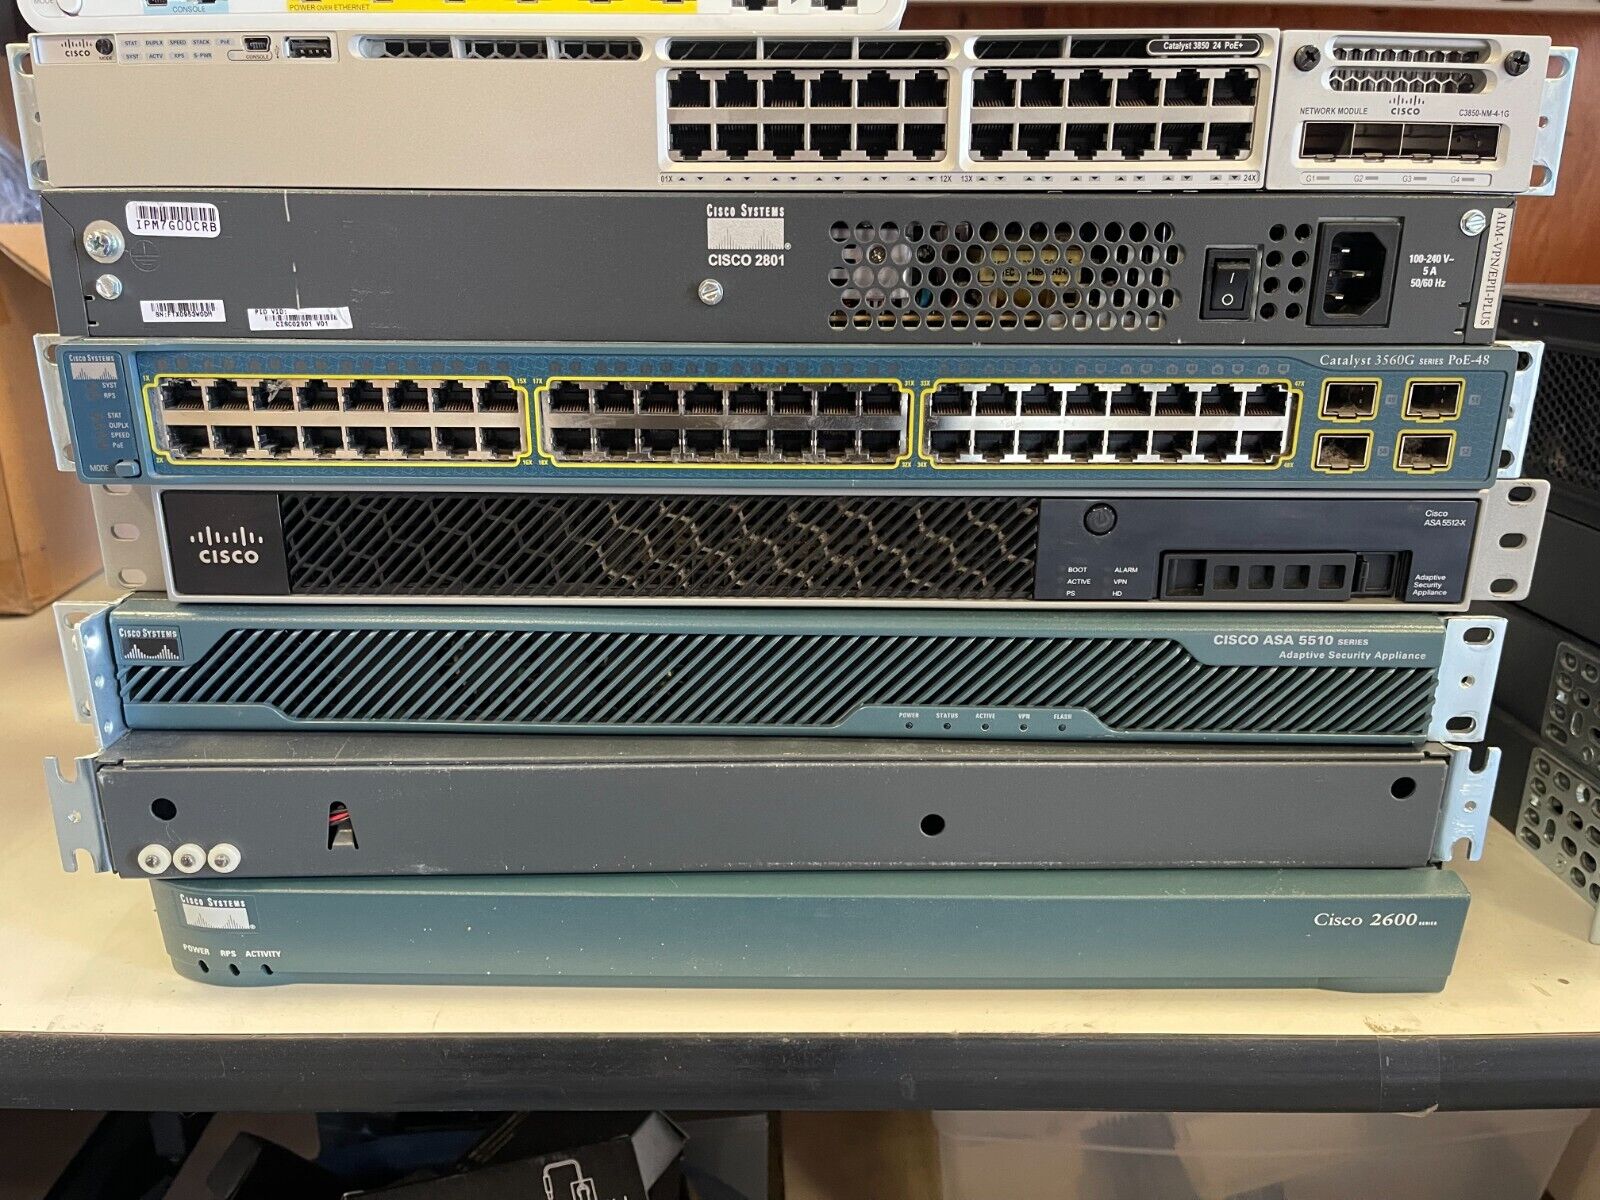 One Lot Of Networking Equipment